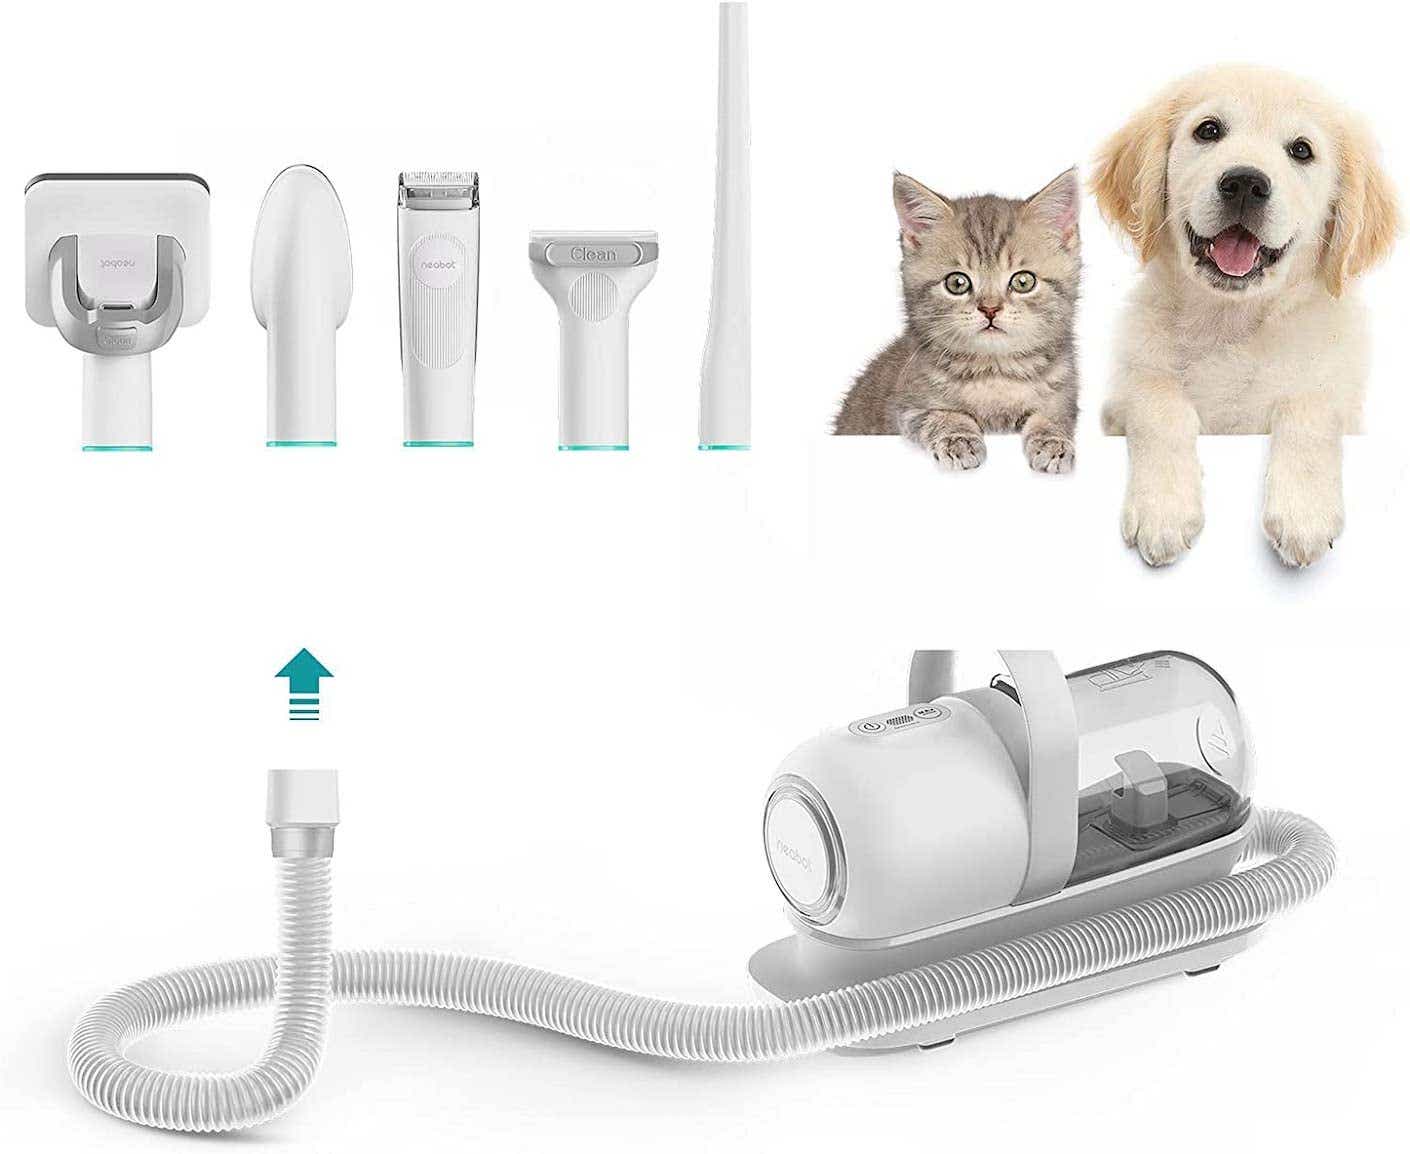 A cat and dog stand next to a white pet vacuum cleaner with five attachment heads.